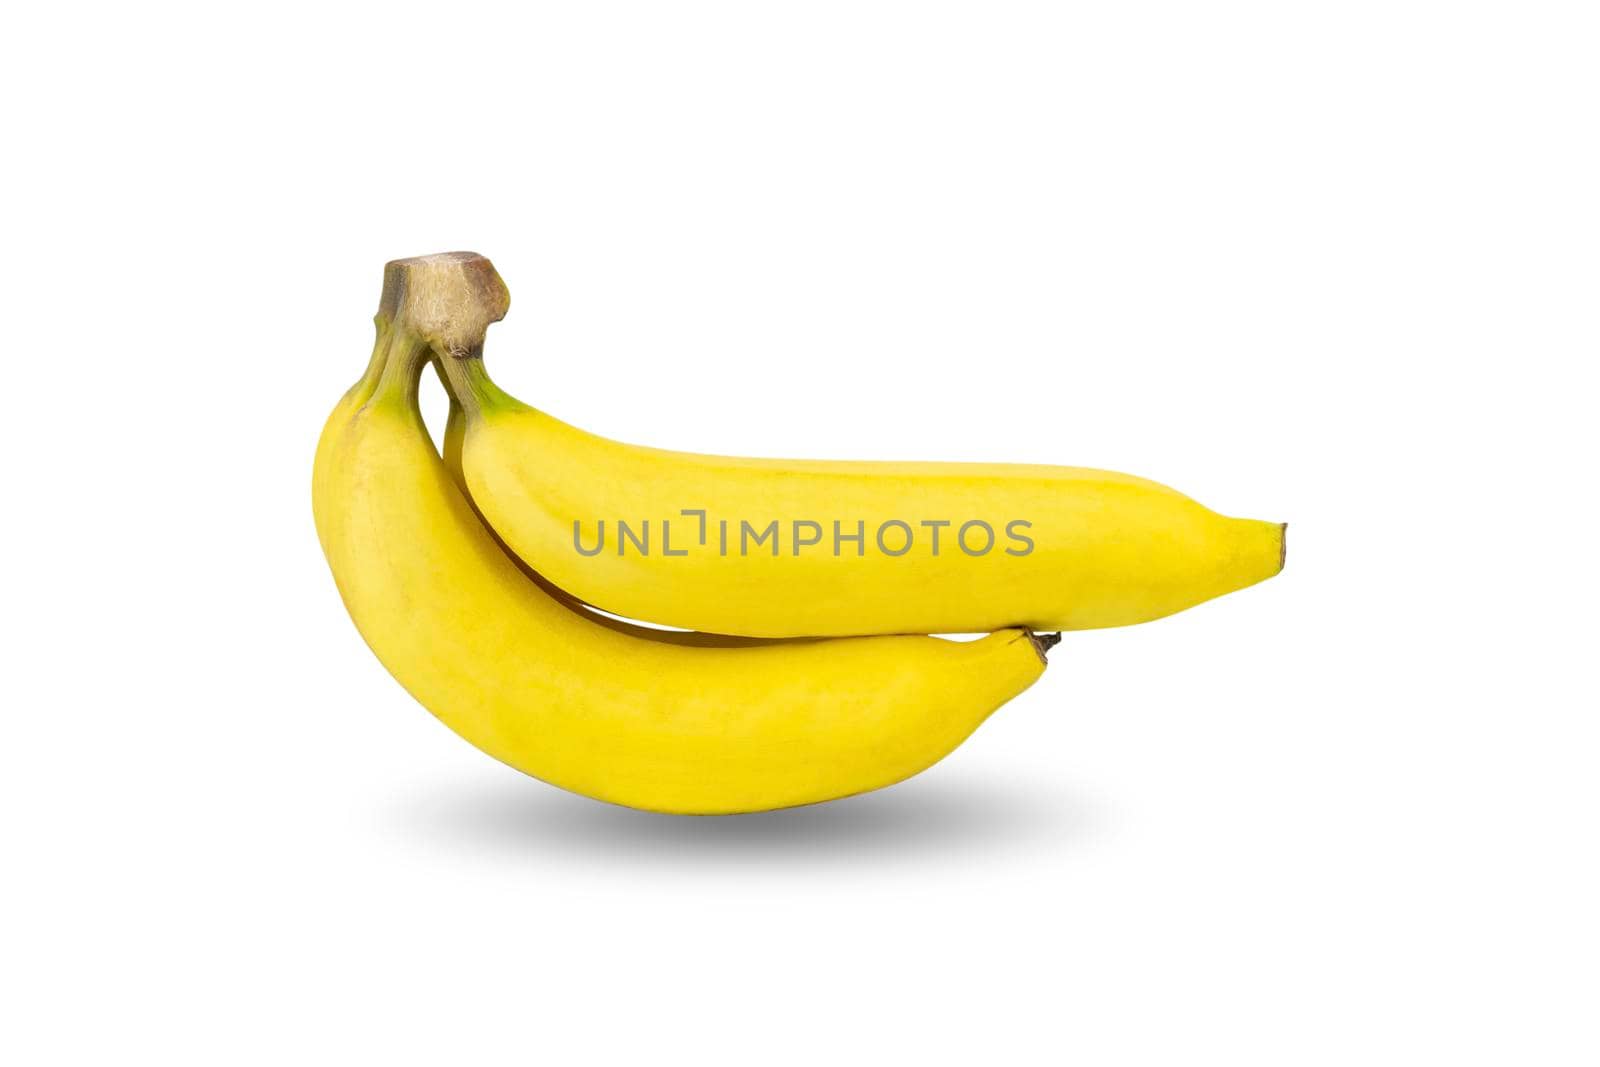 Bunch of ripe yellow bananas isolated on white background.